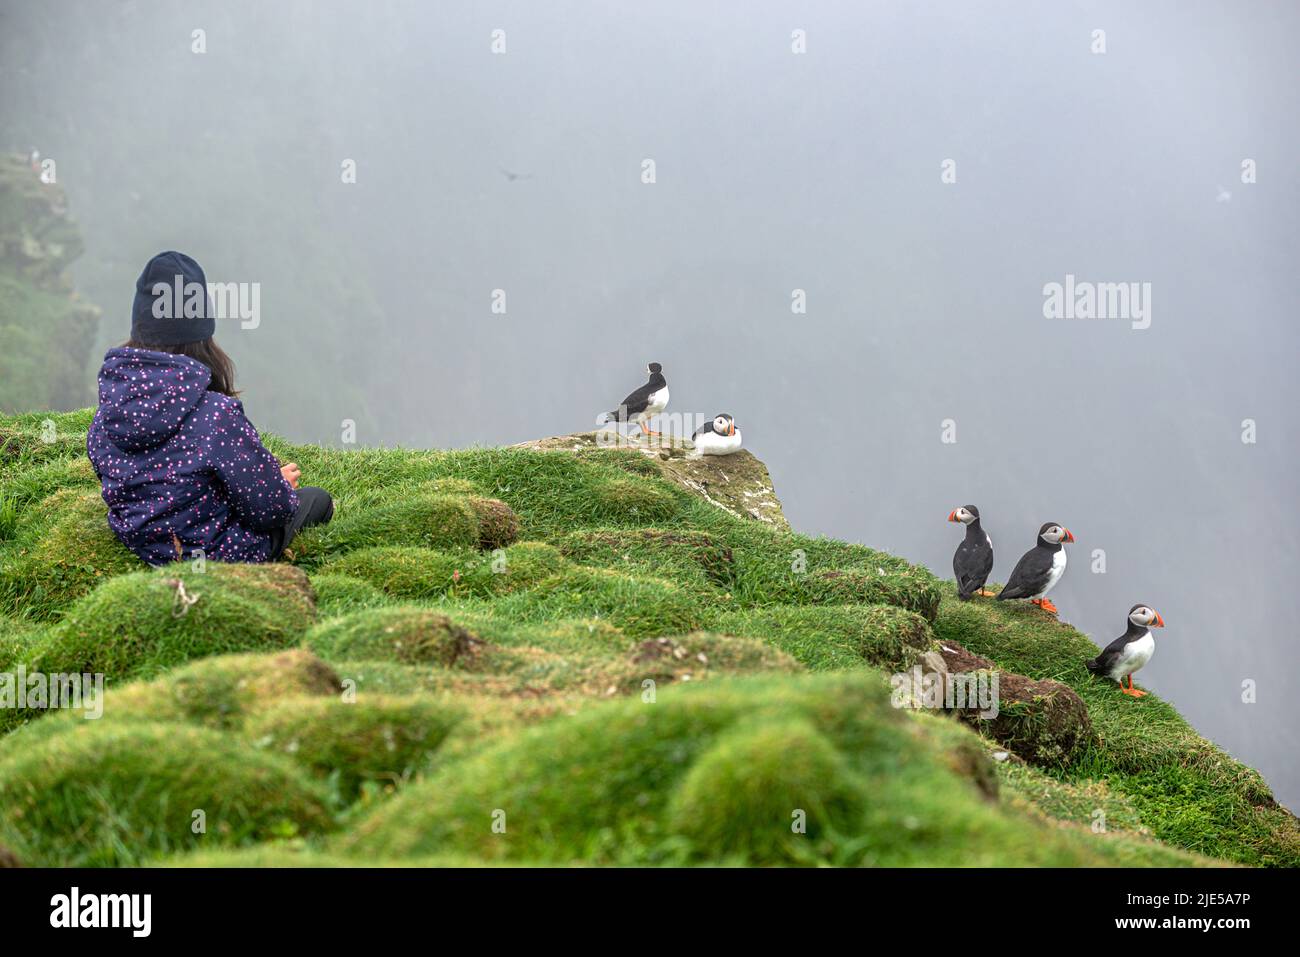 A young girl sitting very close to a group of puffins, Mykines Island, Faroe Islands Stock Photo